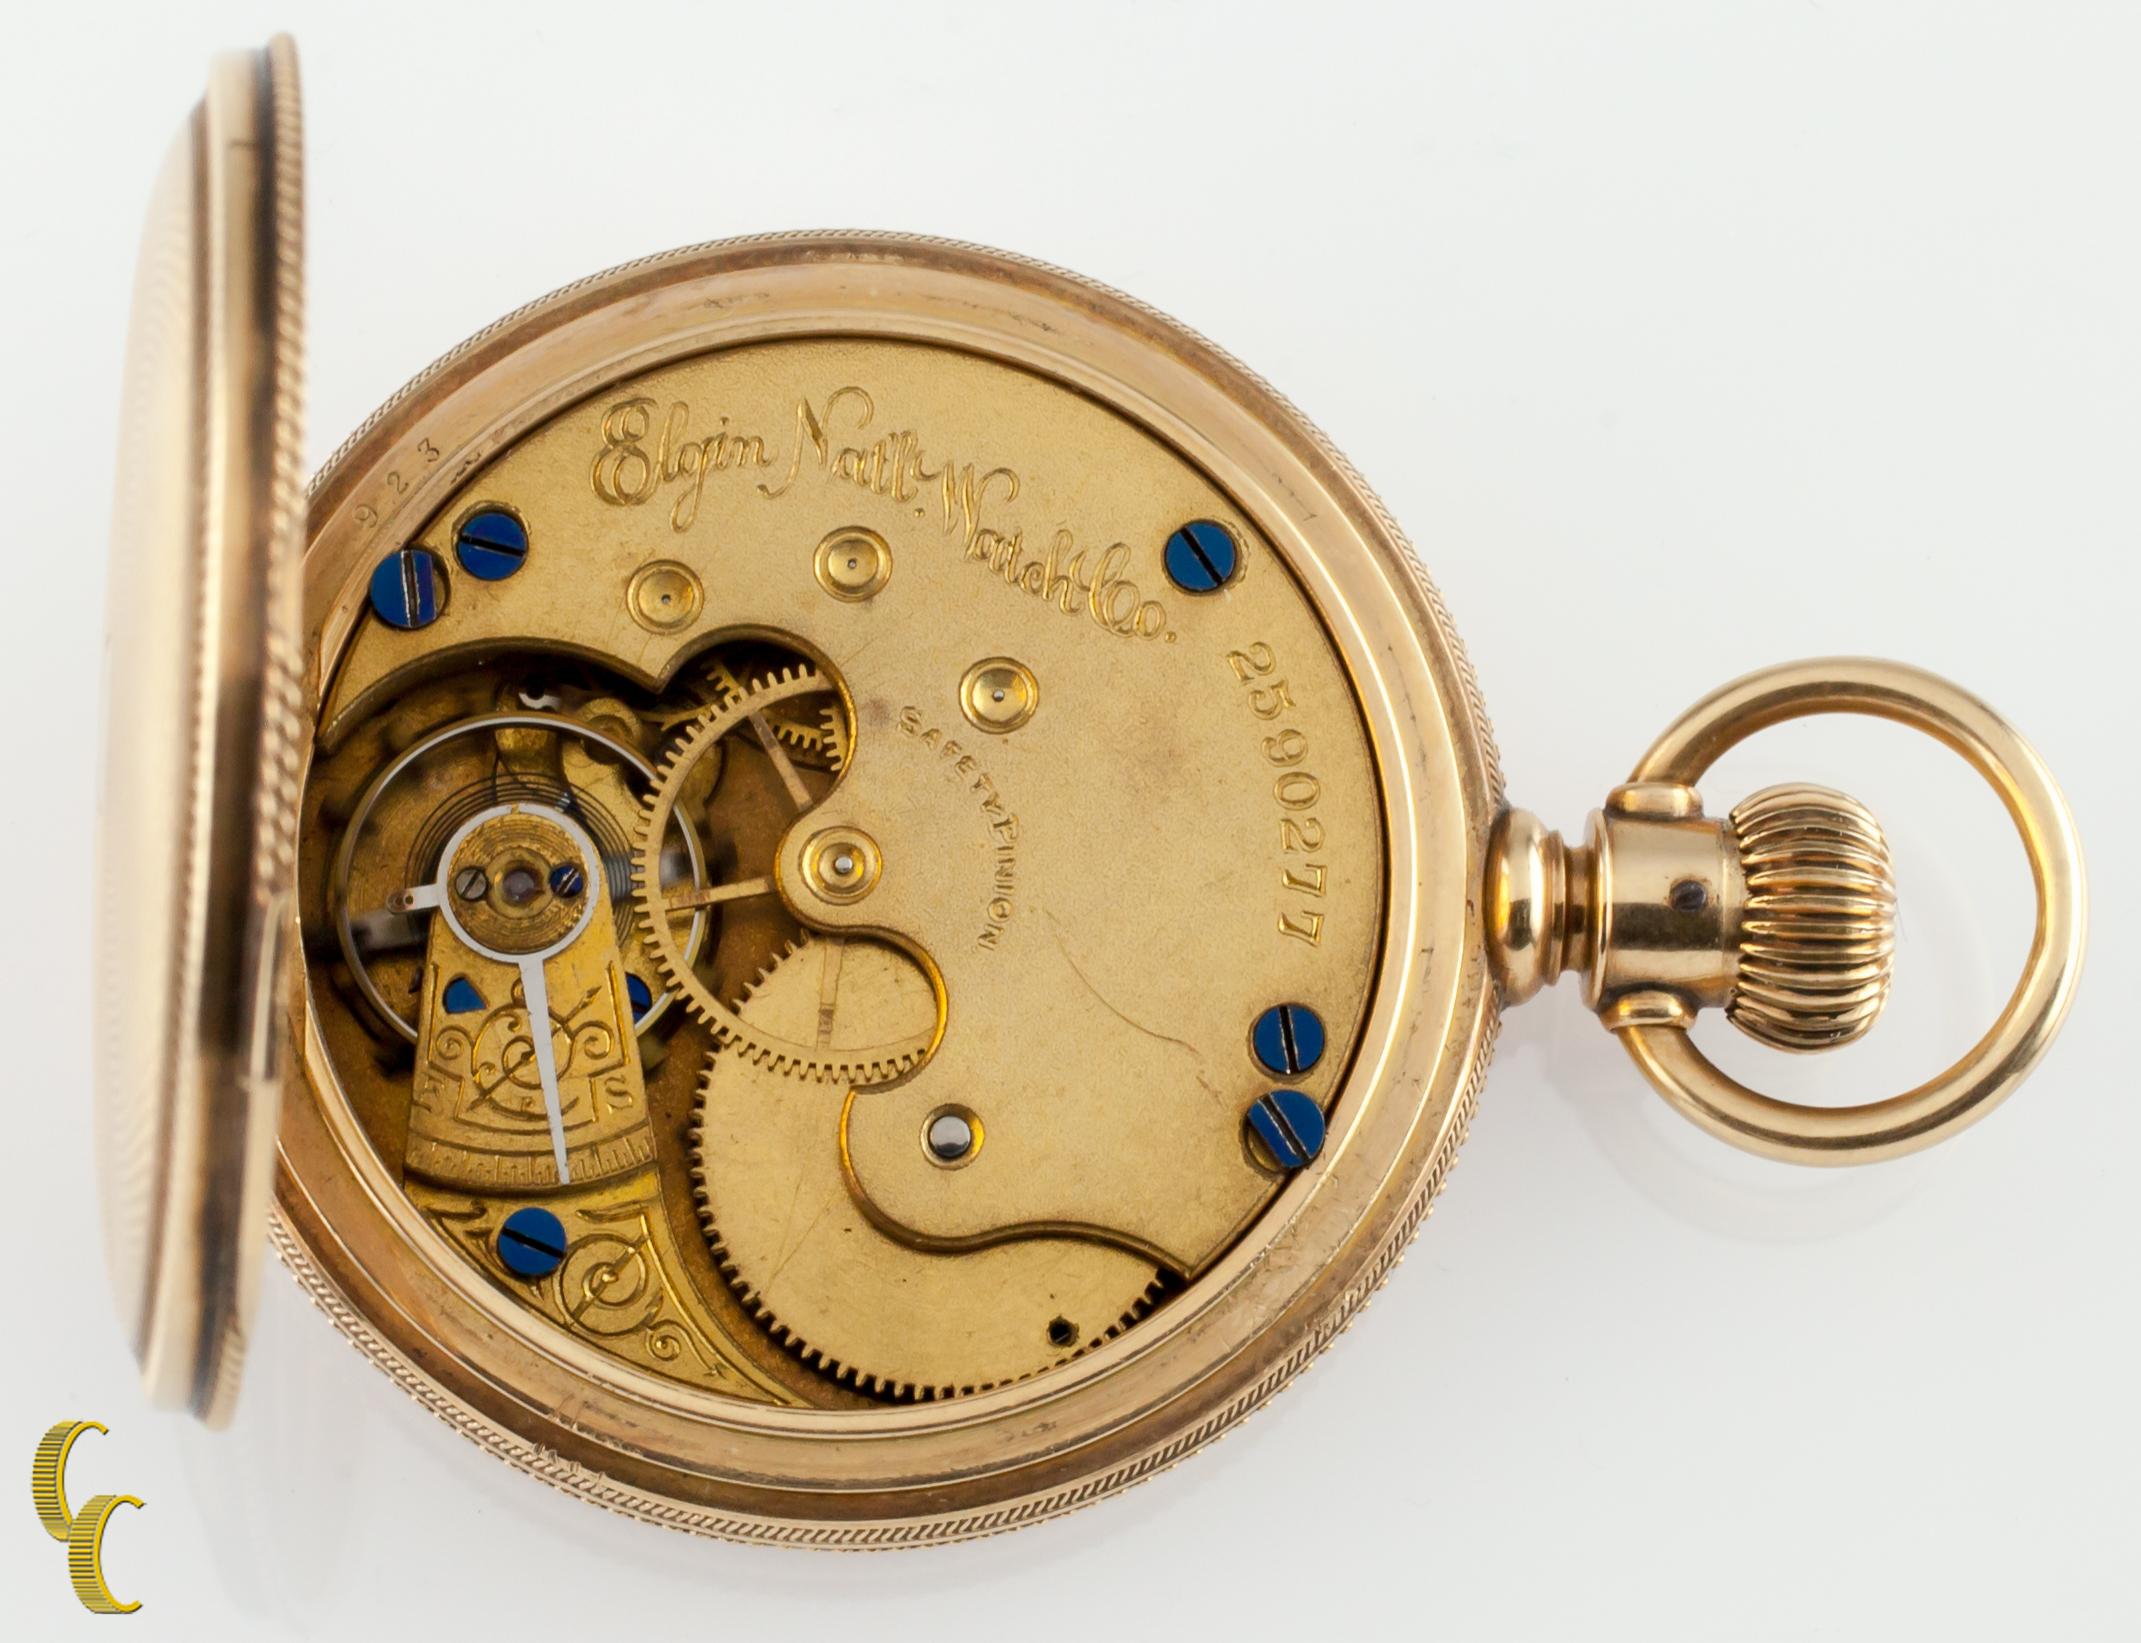 Beautiful Antique Elgin Pocket Watch w/ White Dial Including Cobalt Blue Hands & Dedicated Second Dial
14k Yellow Solid Gold Case w/ Intricate Pie Crust Guilloche Design
Black Roman Numerals
Case Serial #1198923
7-Jewel Elgin Movement Serial